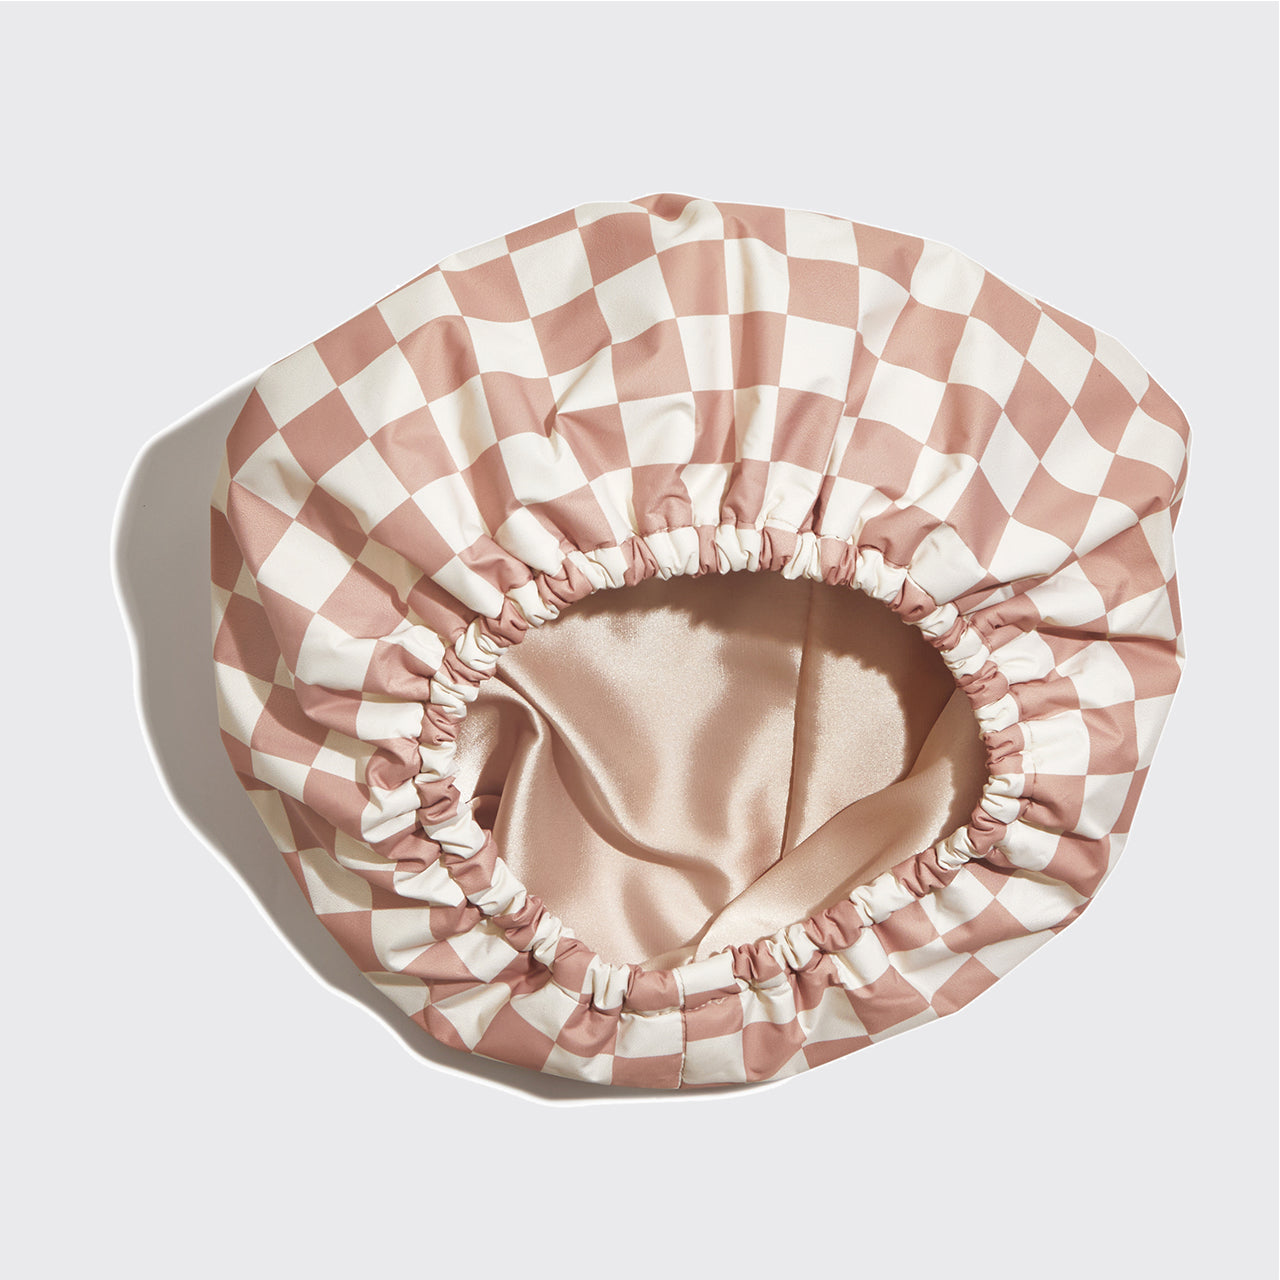 Recycled Polyester Luxe Shower Cap - Stripe – KITSCH